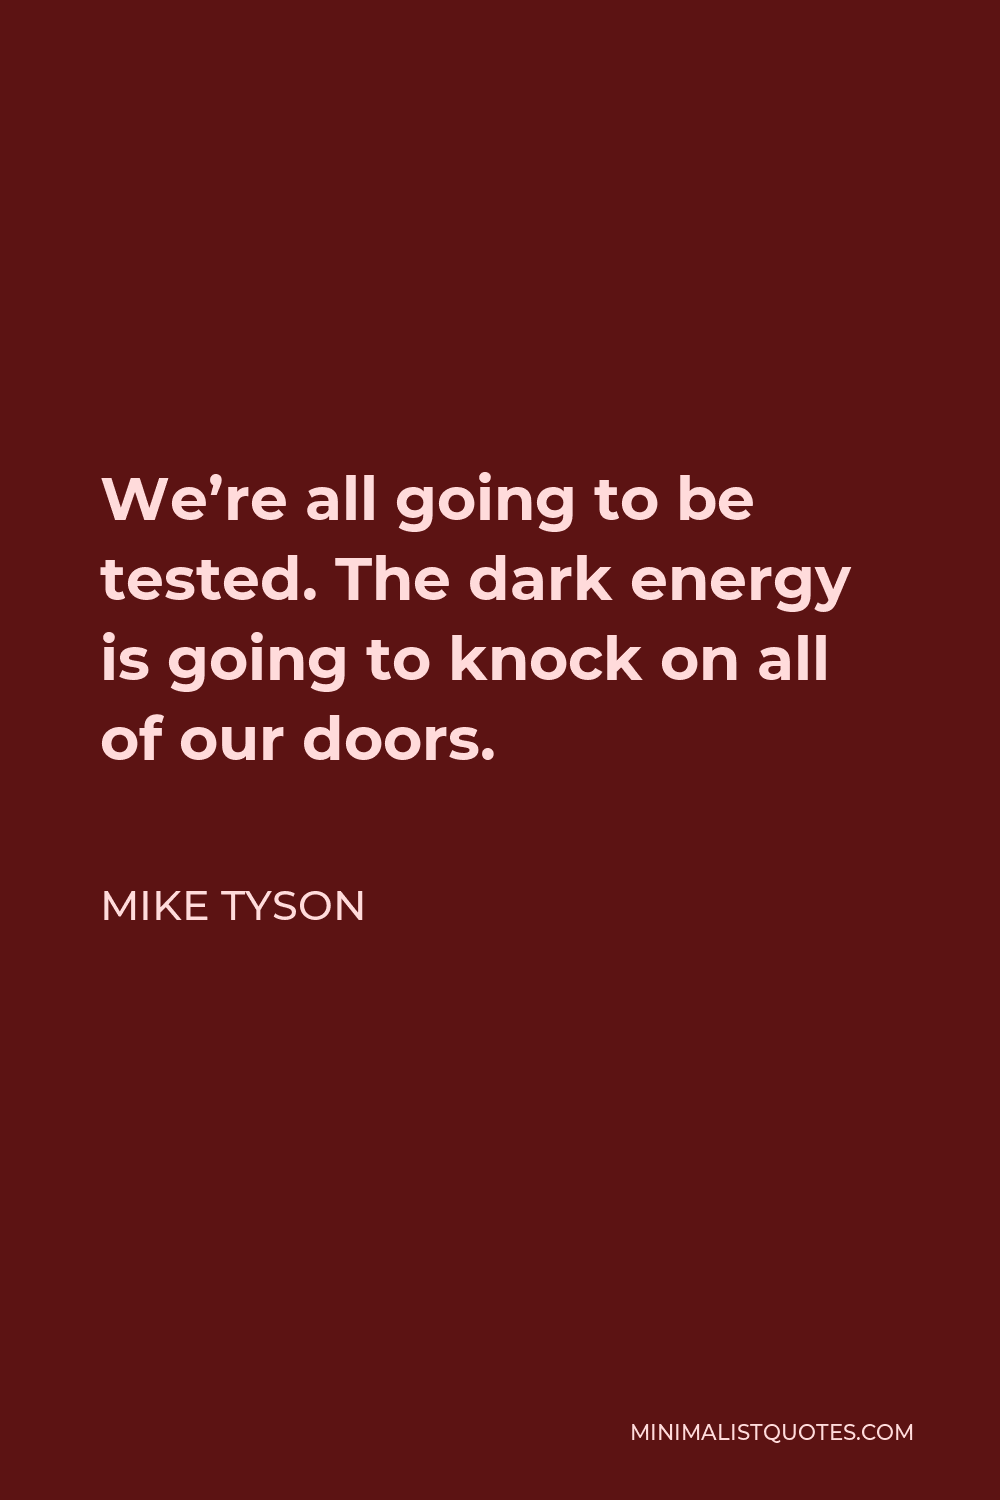 Mike Tyson Quote - We’re all going to be tested. The dark energy is going to knock on all of our doors.